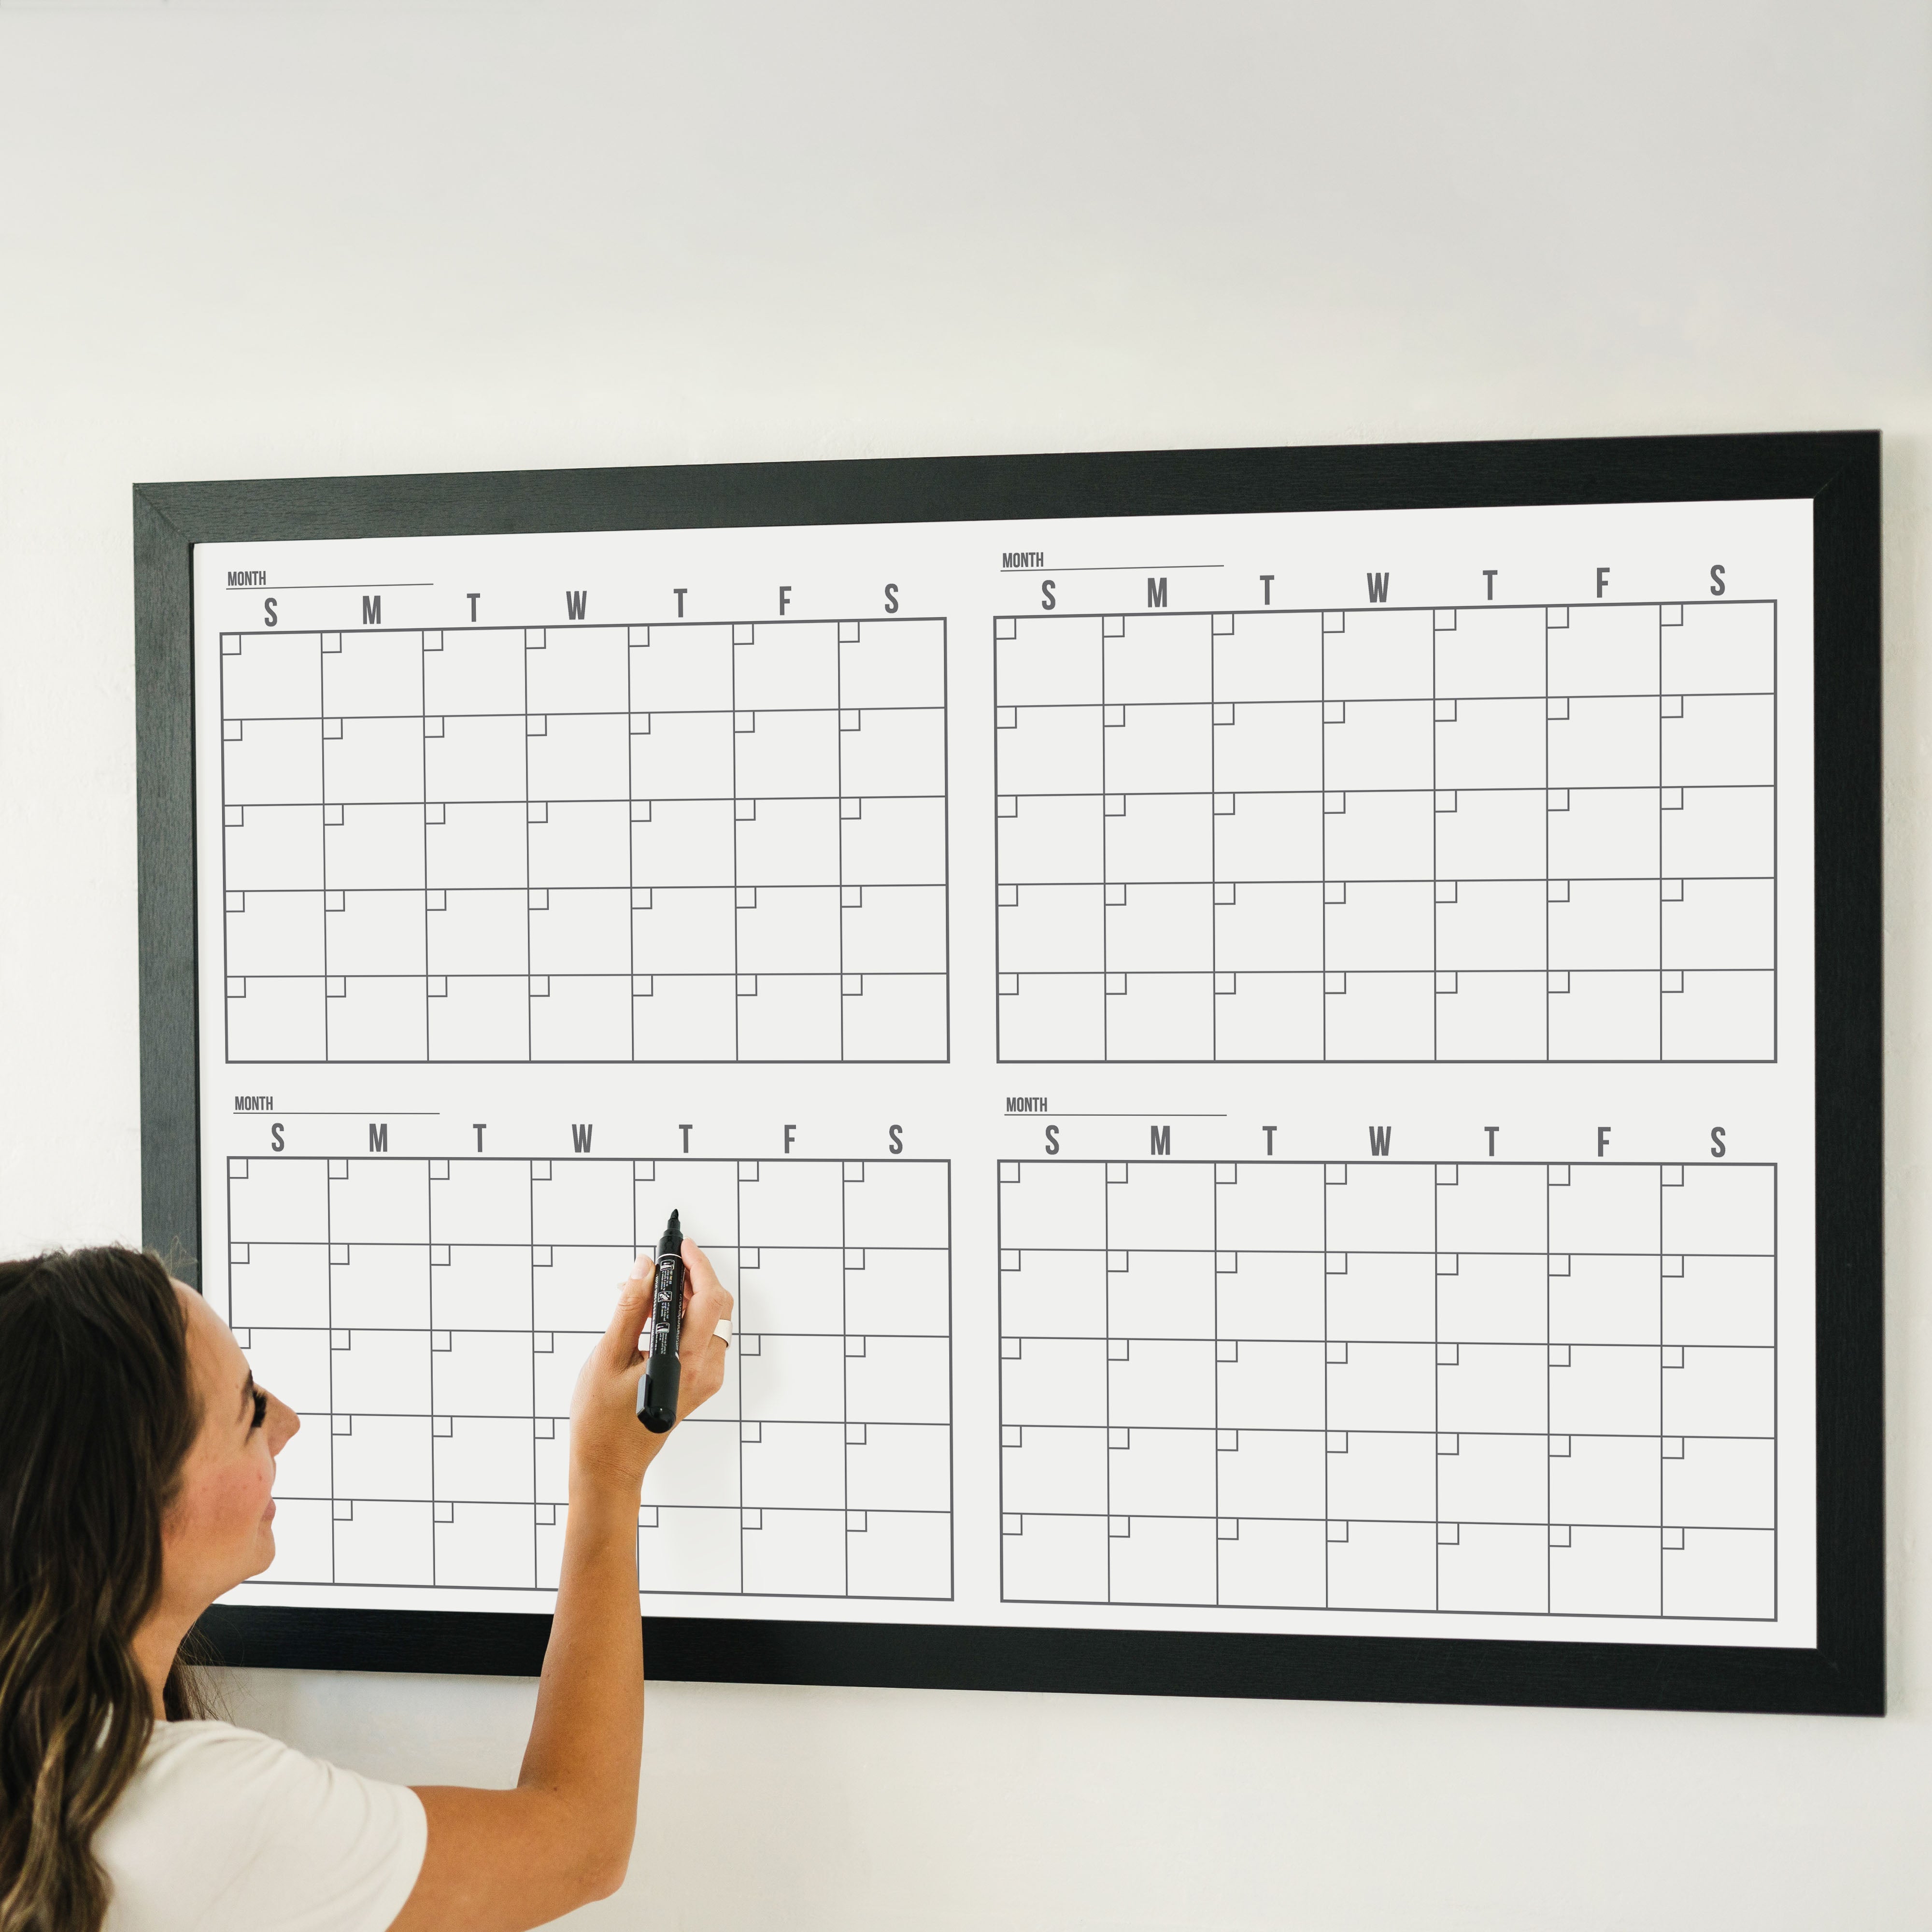 A framed whiteboard four month calendar hanging on the wall